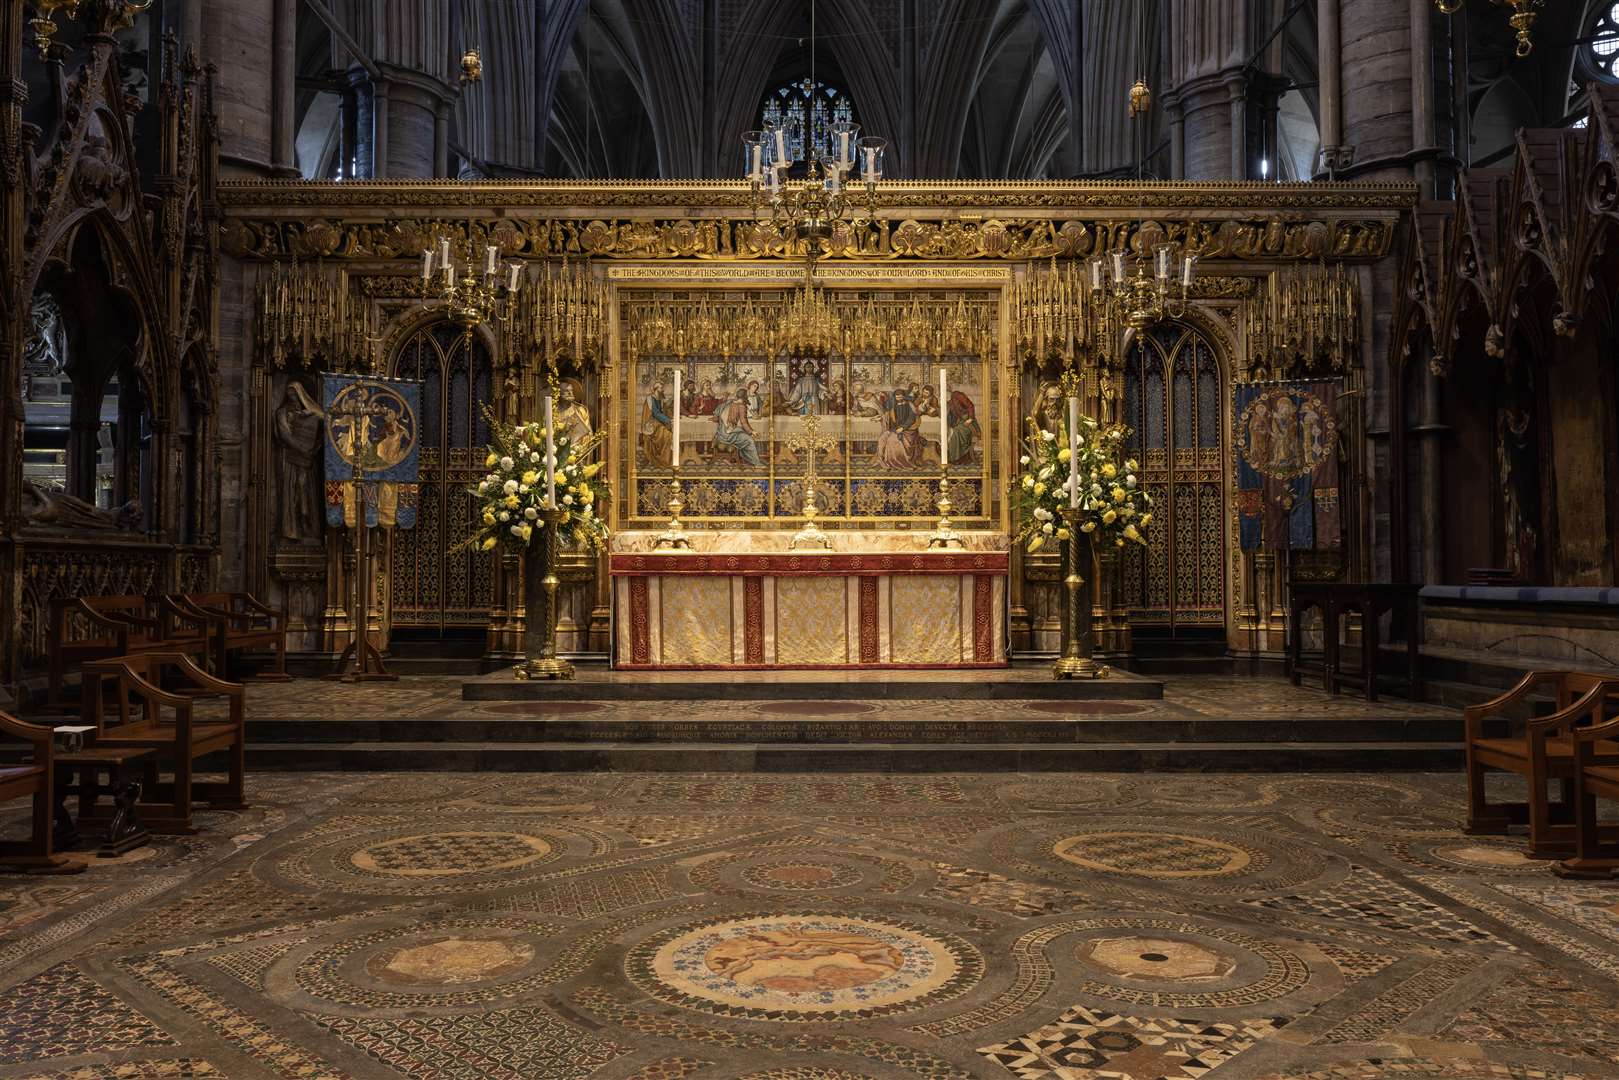 The Cosmati pavement and the High Altar in Westminster Abbey (Dan Kitwood/PA)